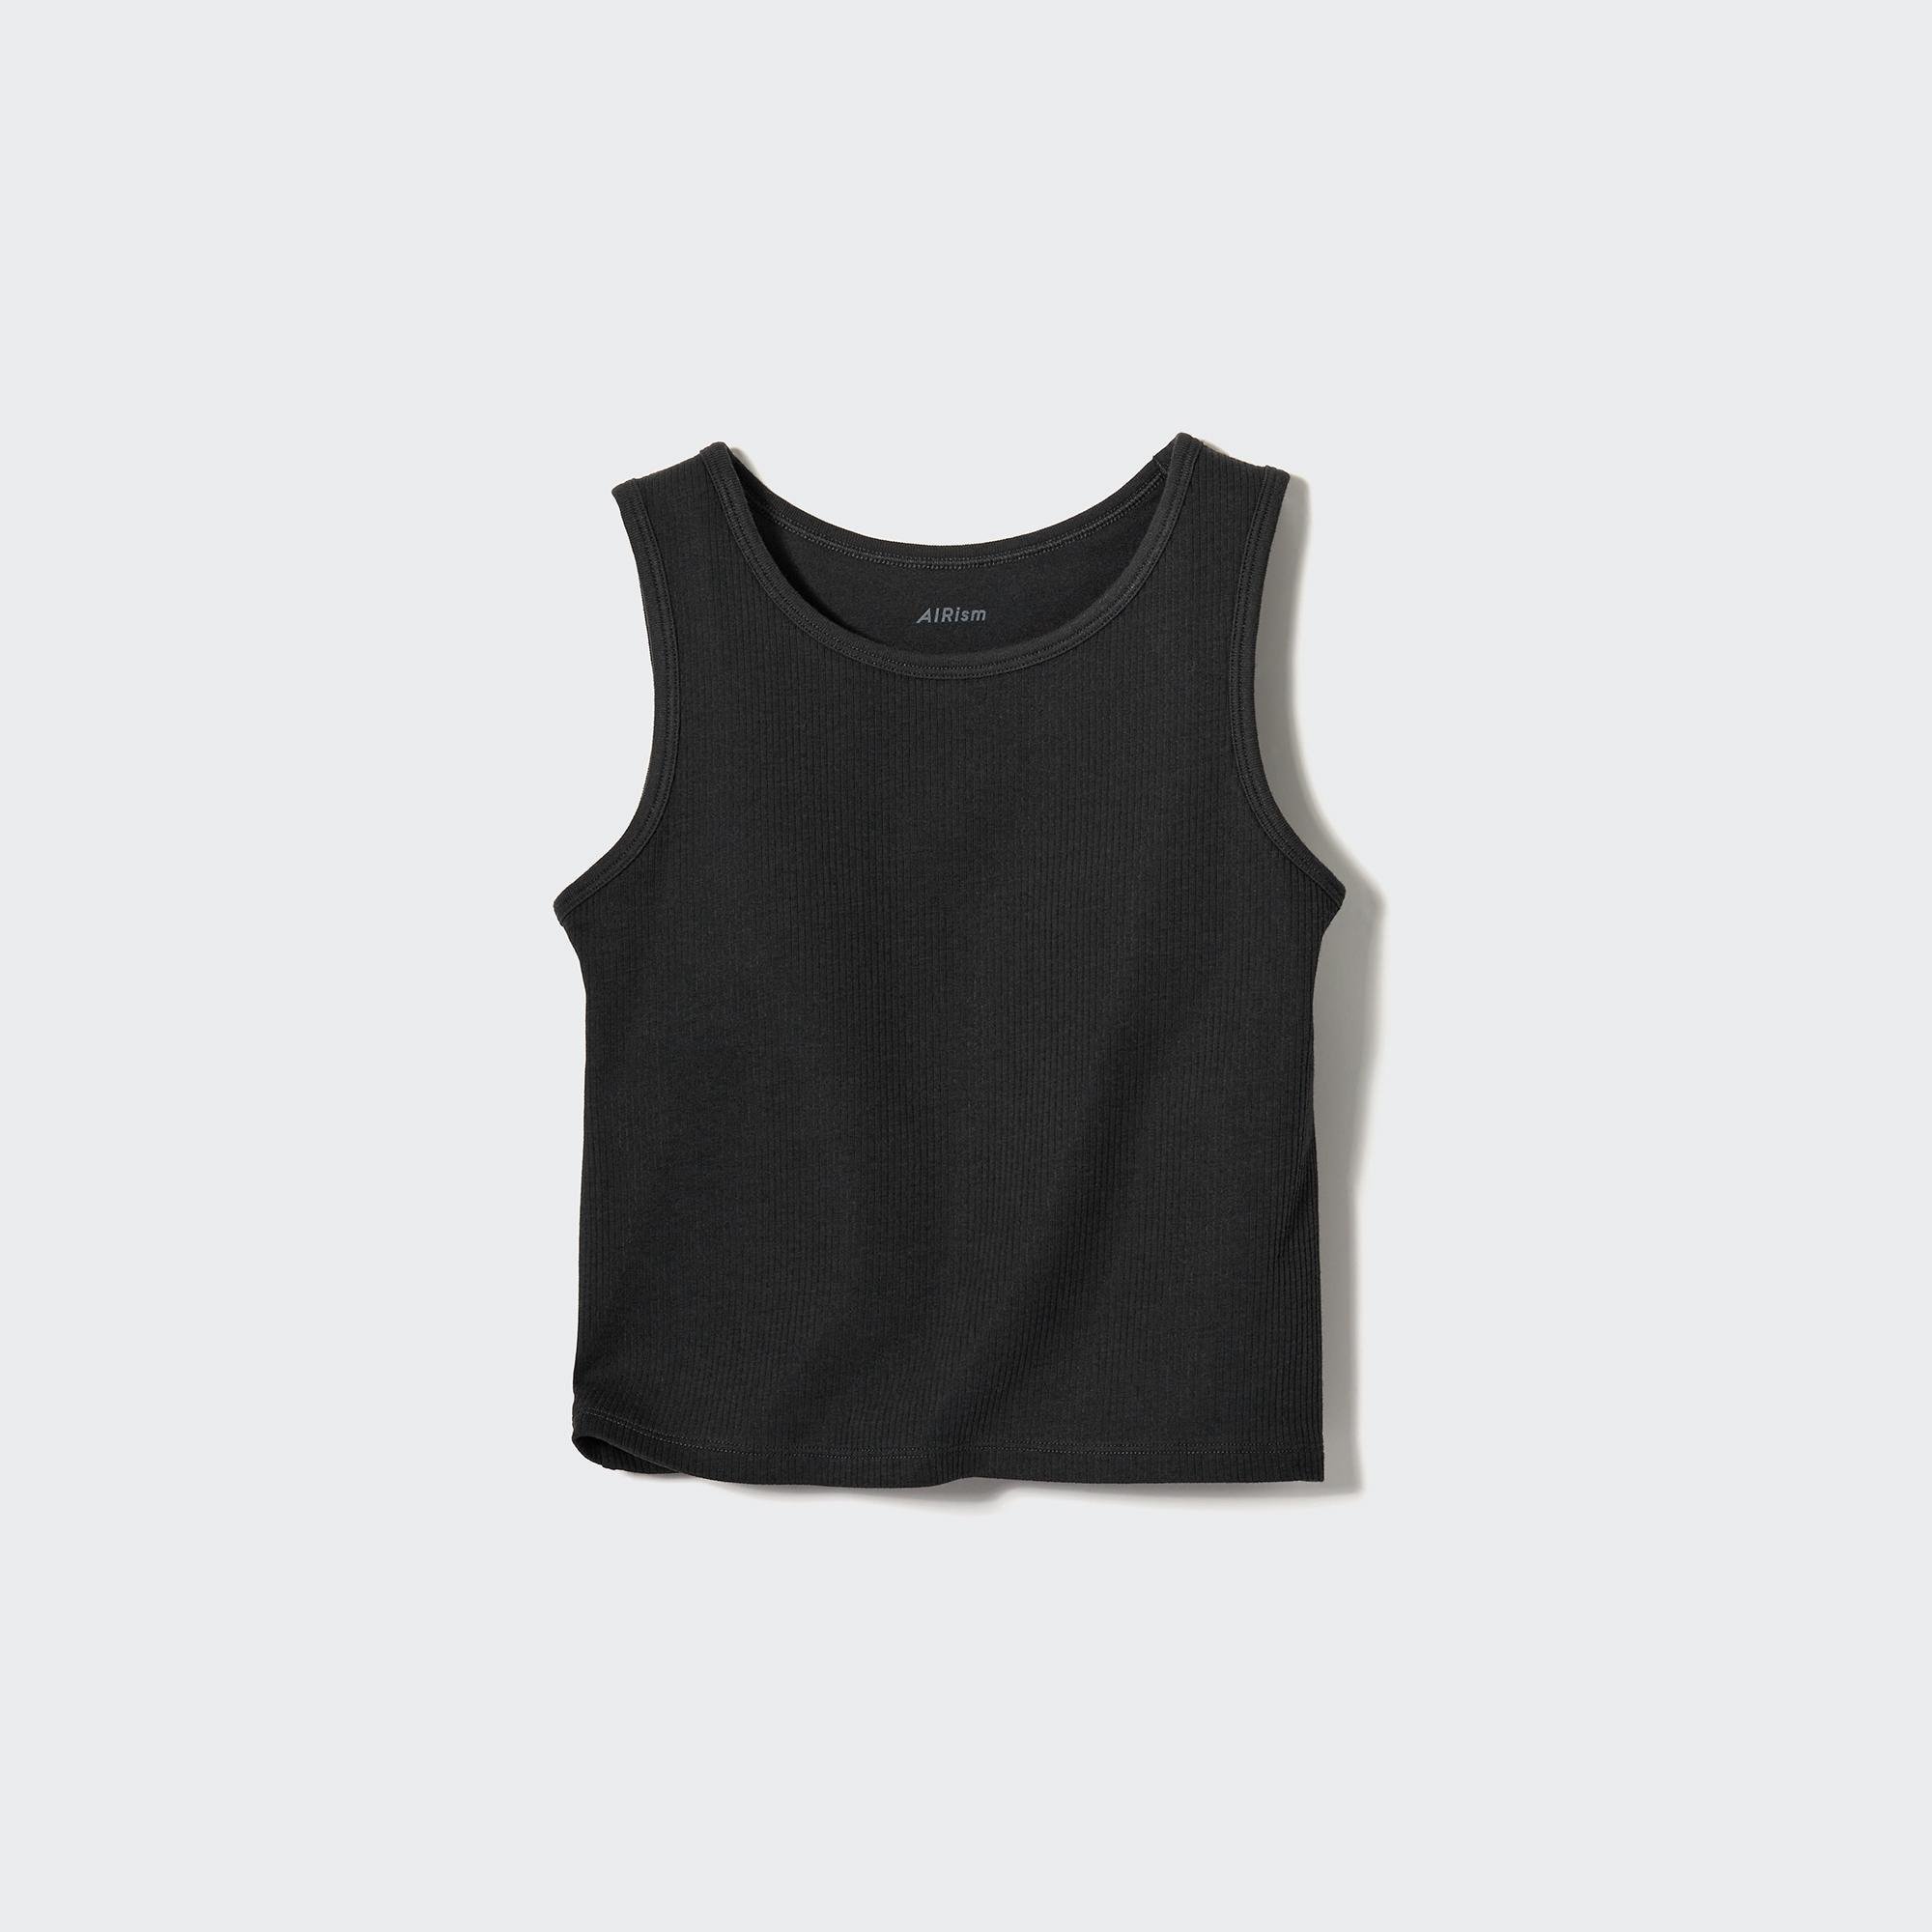 AIRism Cotton Ribbed Cropped Bra Tank Top by UNIQLO